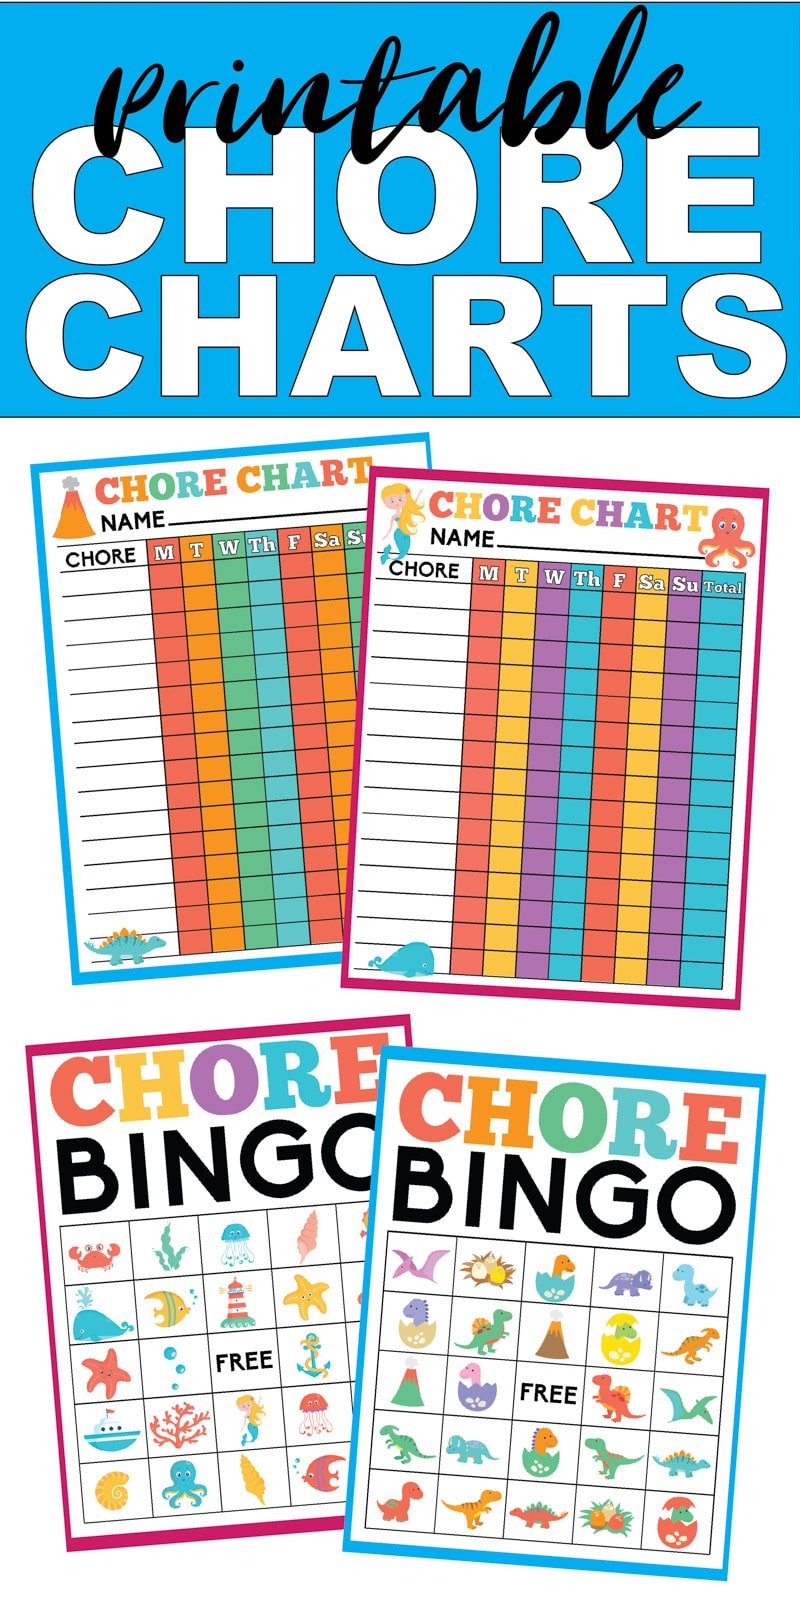 Free printable chore chart for kids! Two different designs that both girls and boys! Daily template that you can add your own family chores to. Great or one kid or multiple kids!